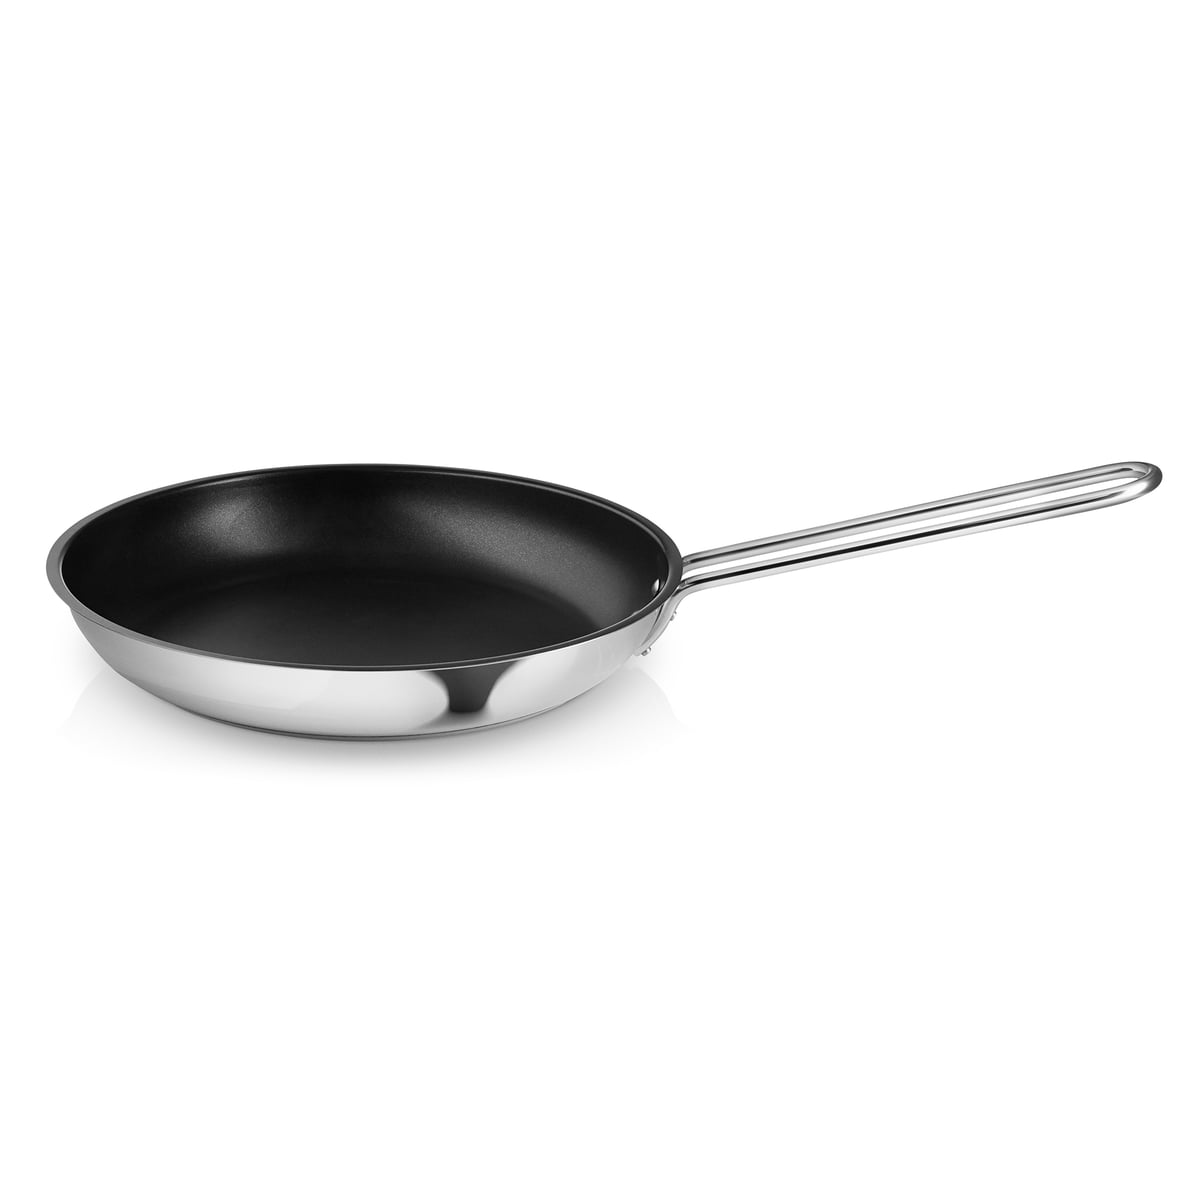 Frying pan made of stainless steel by trio